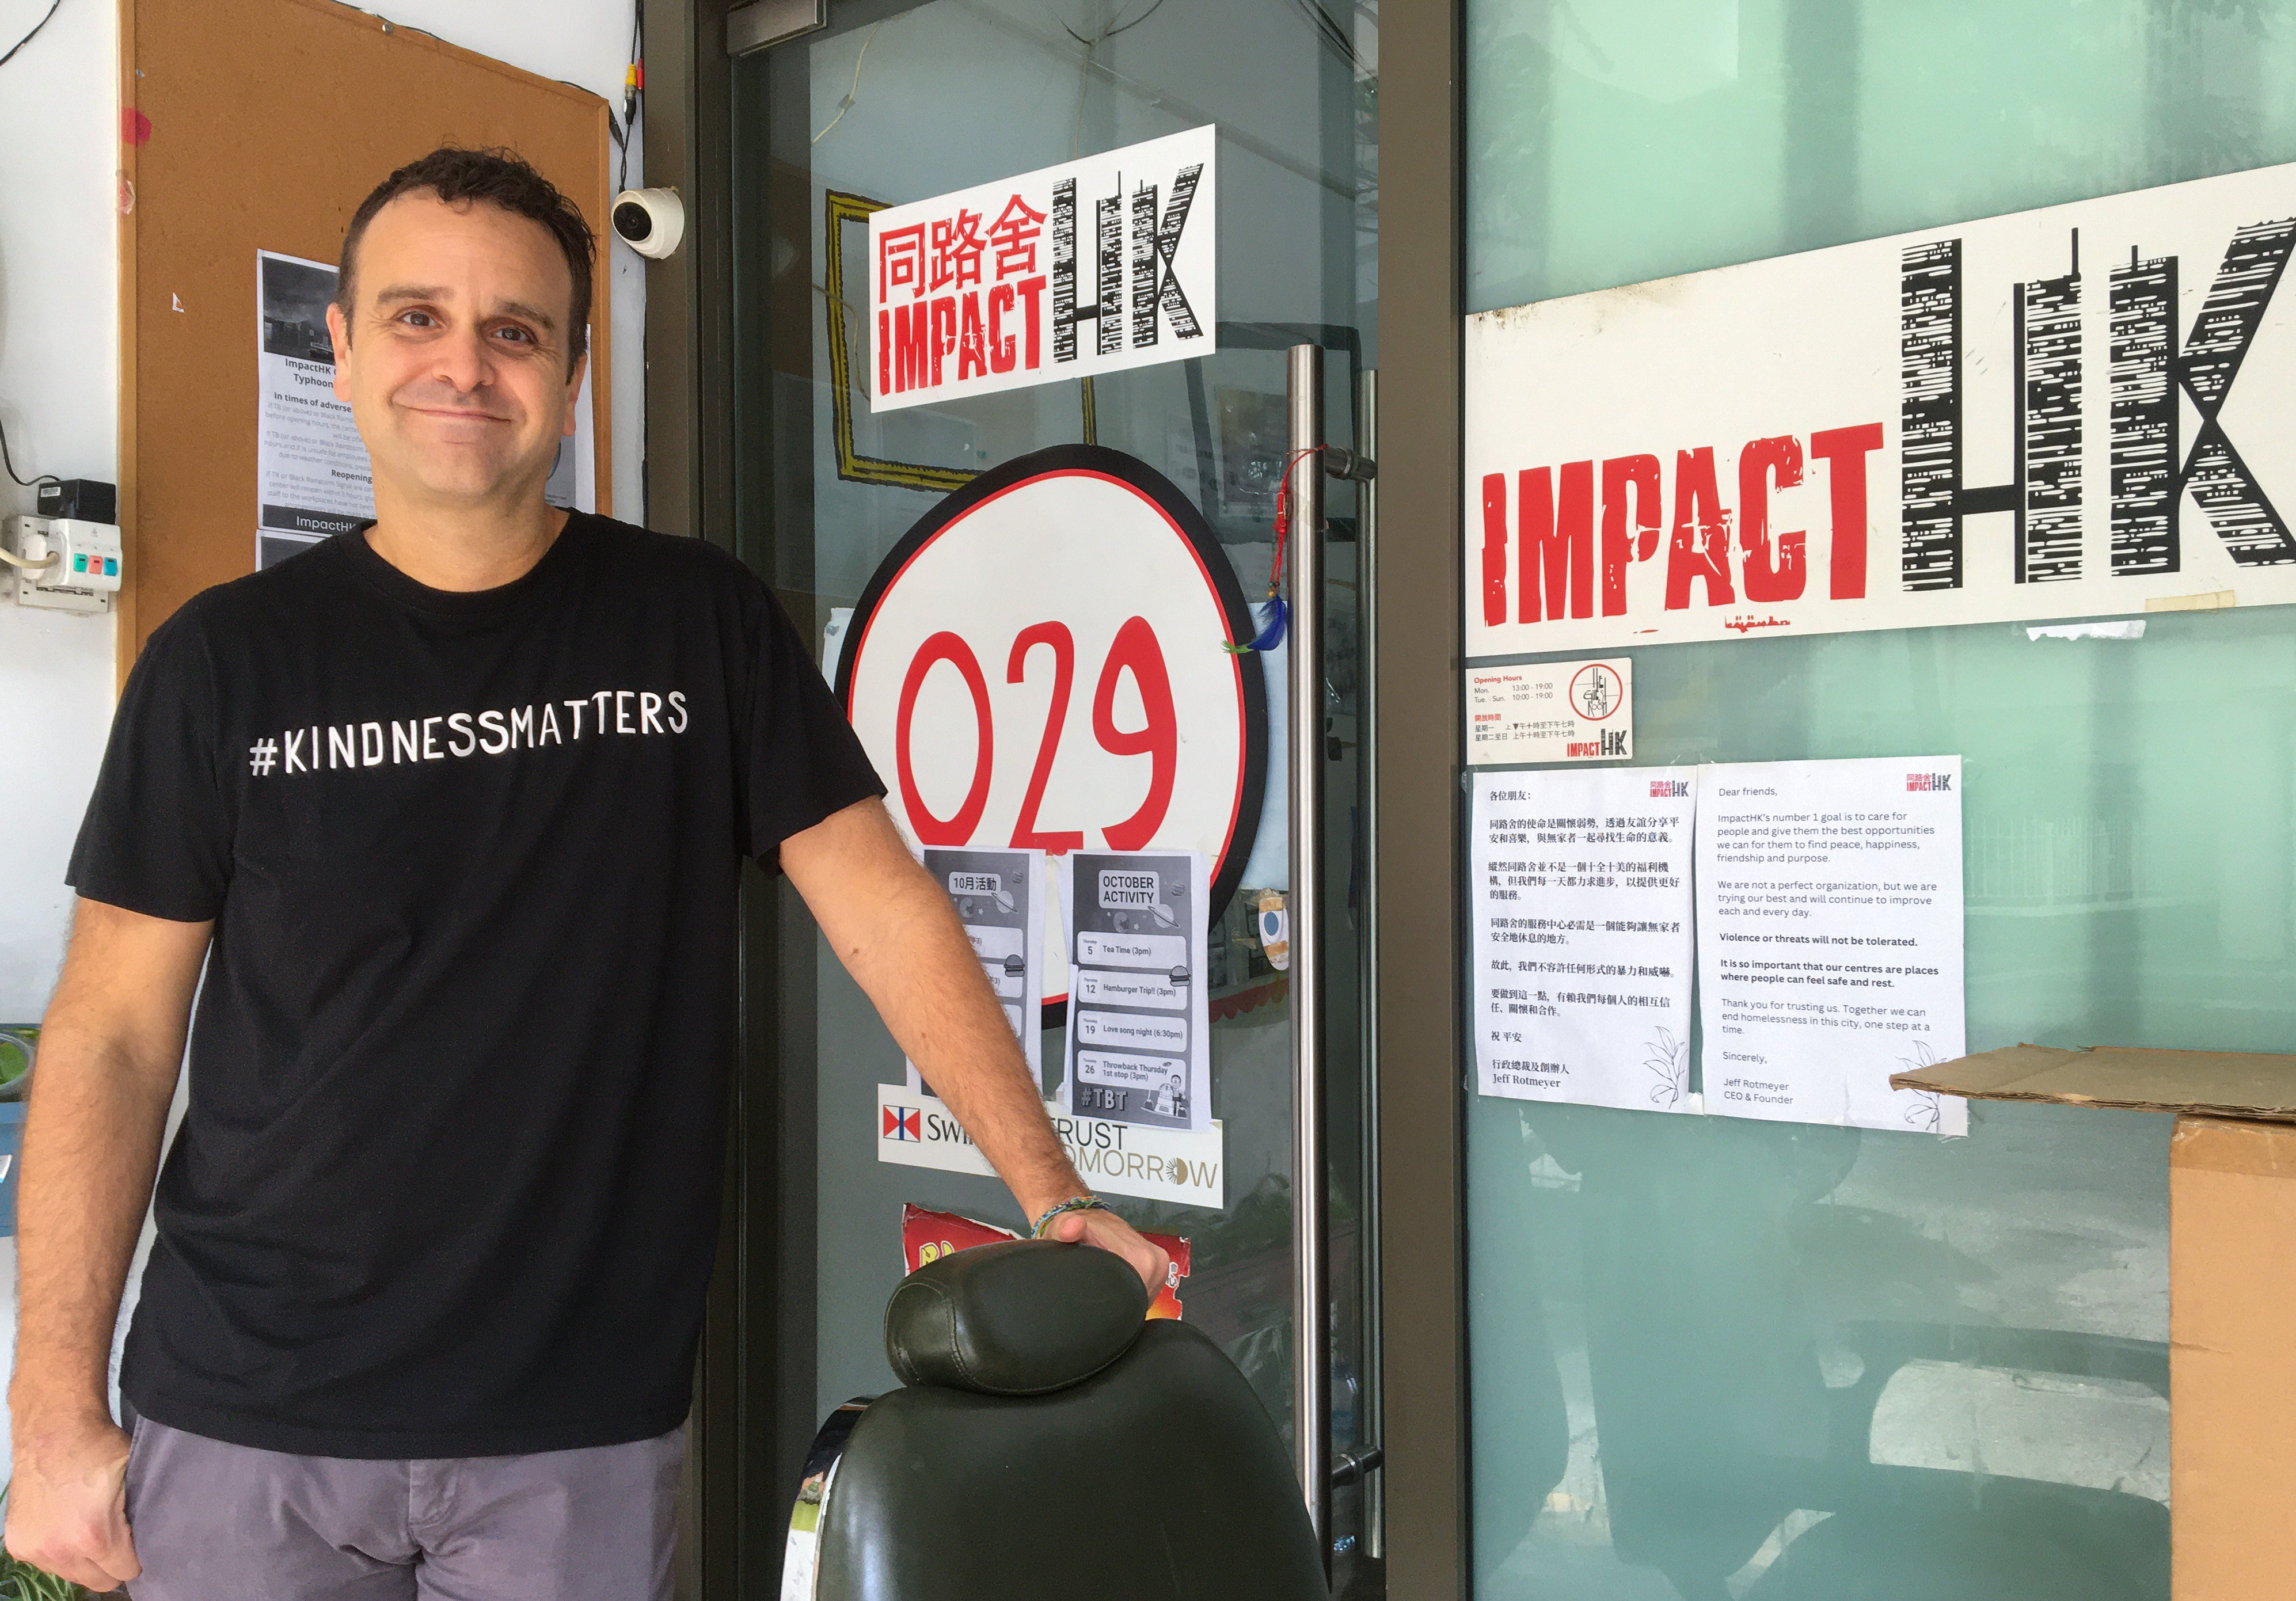 Jeff Rotmeyer, founder and CEO of ImpactHK, says funding was much needed to address a surge in homelessness during the pandemic. Photo: Cindy Sui